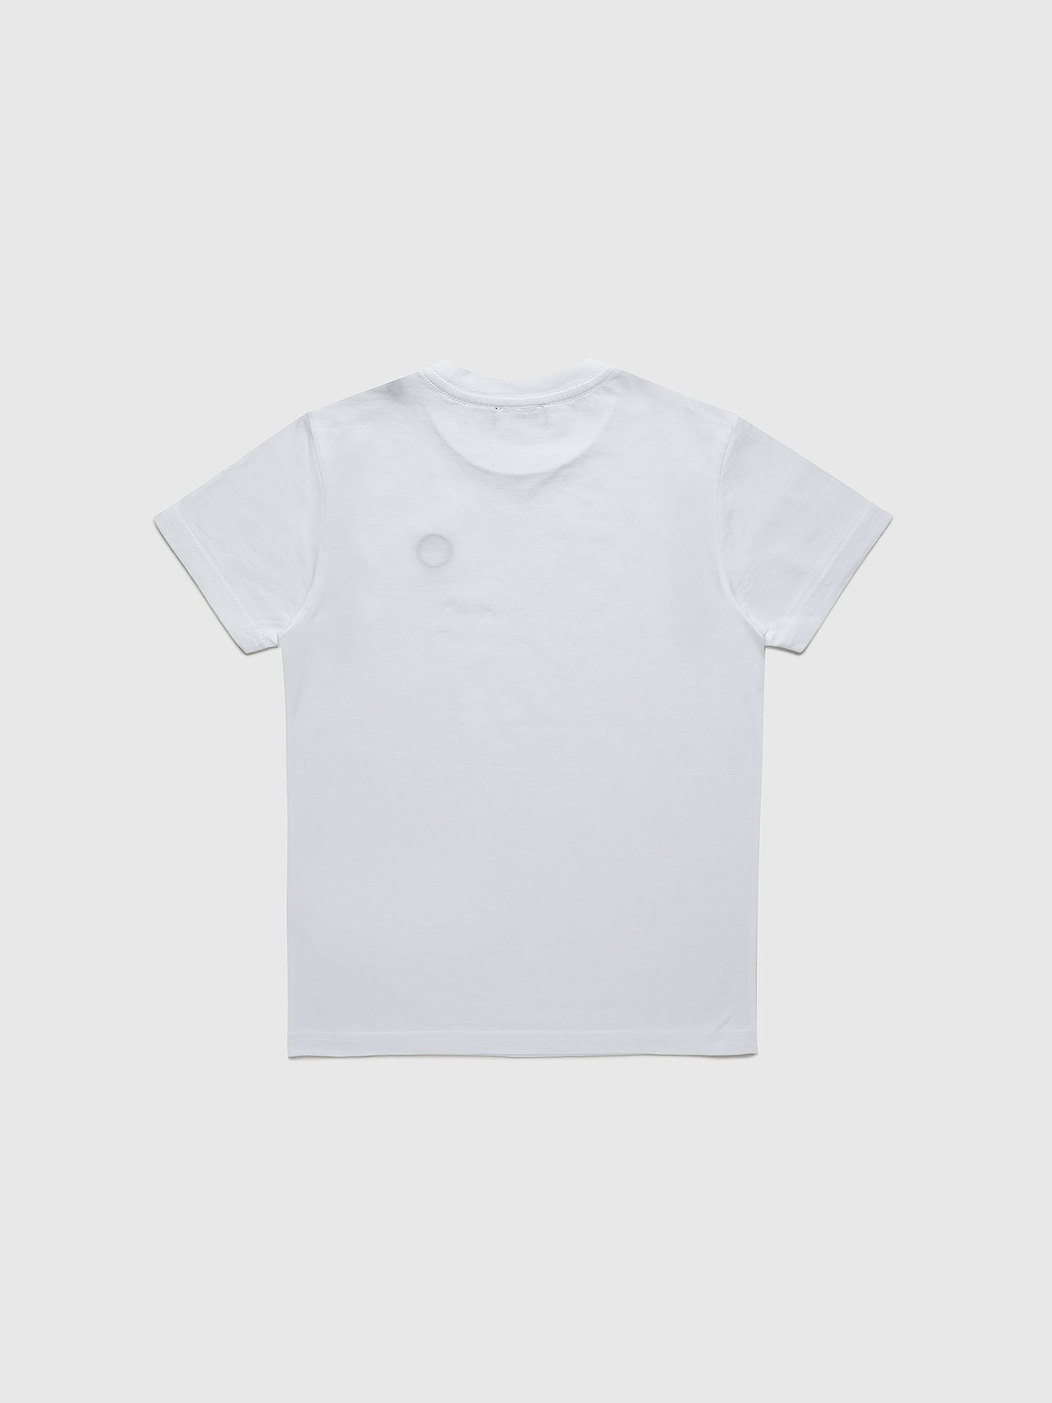 KIDS MONOCHROME T-SHIRT WITH MOHAWK PATCH